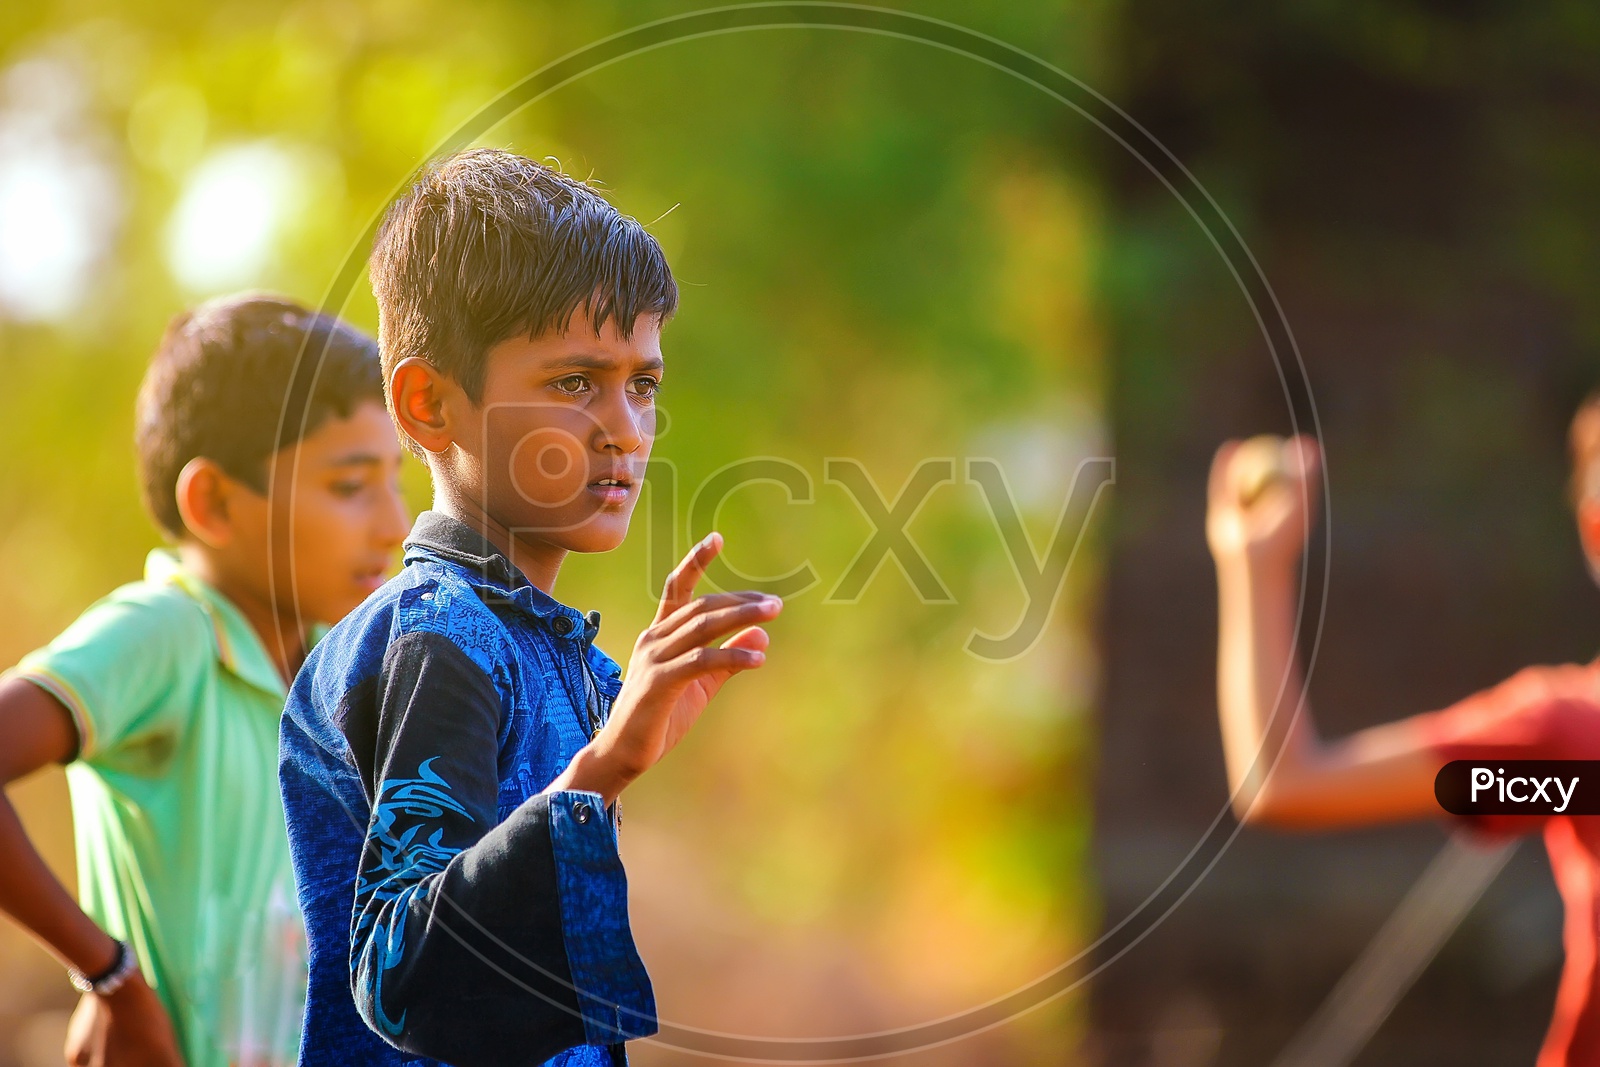 Indian Rural Village Kids Playing Outdoor in Green Environment